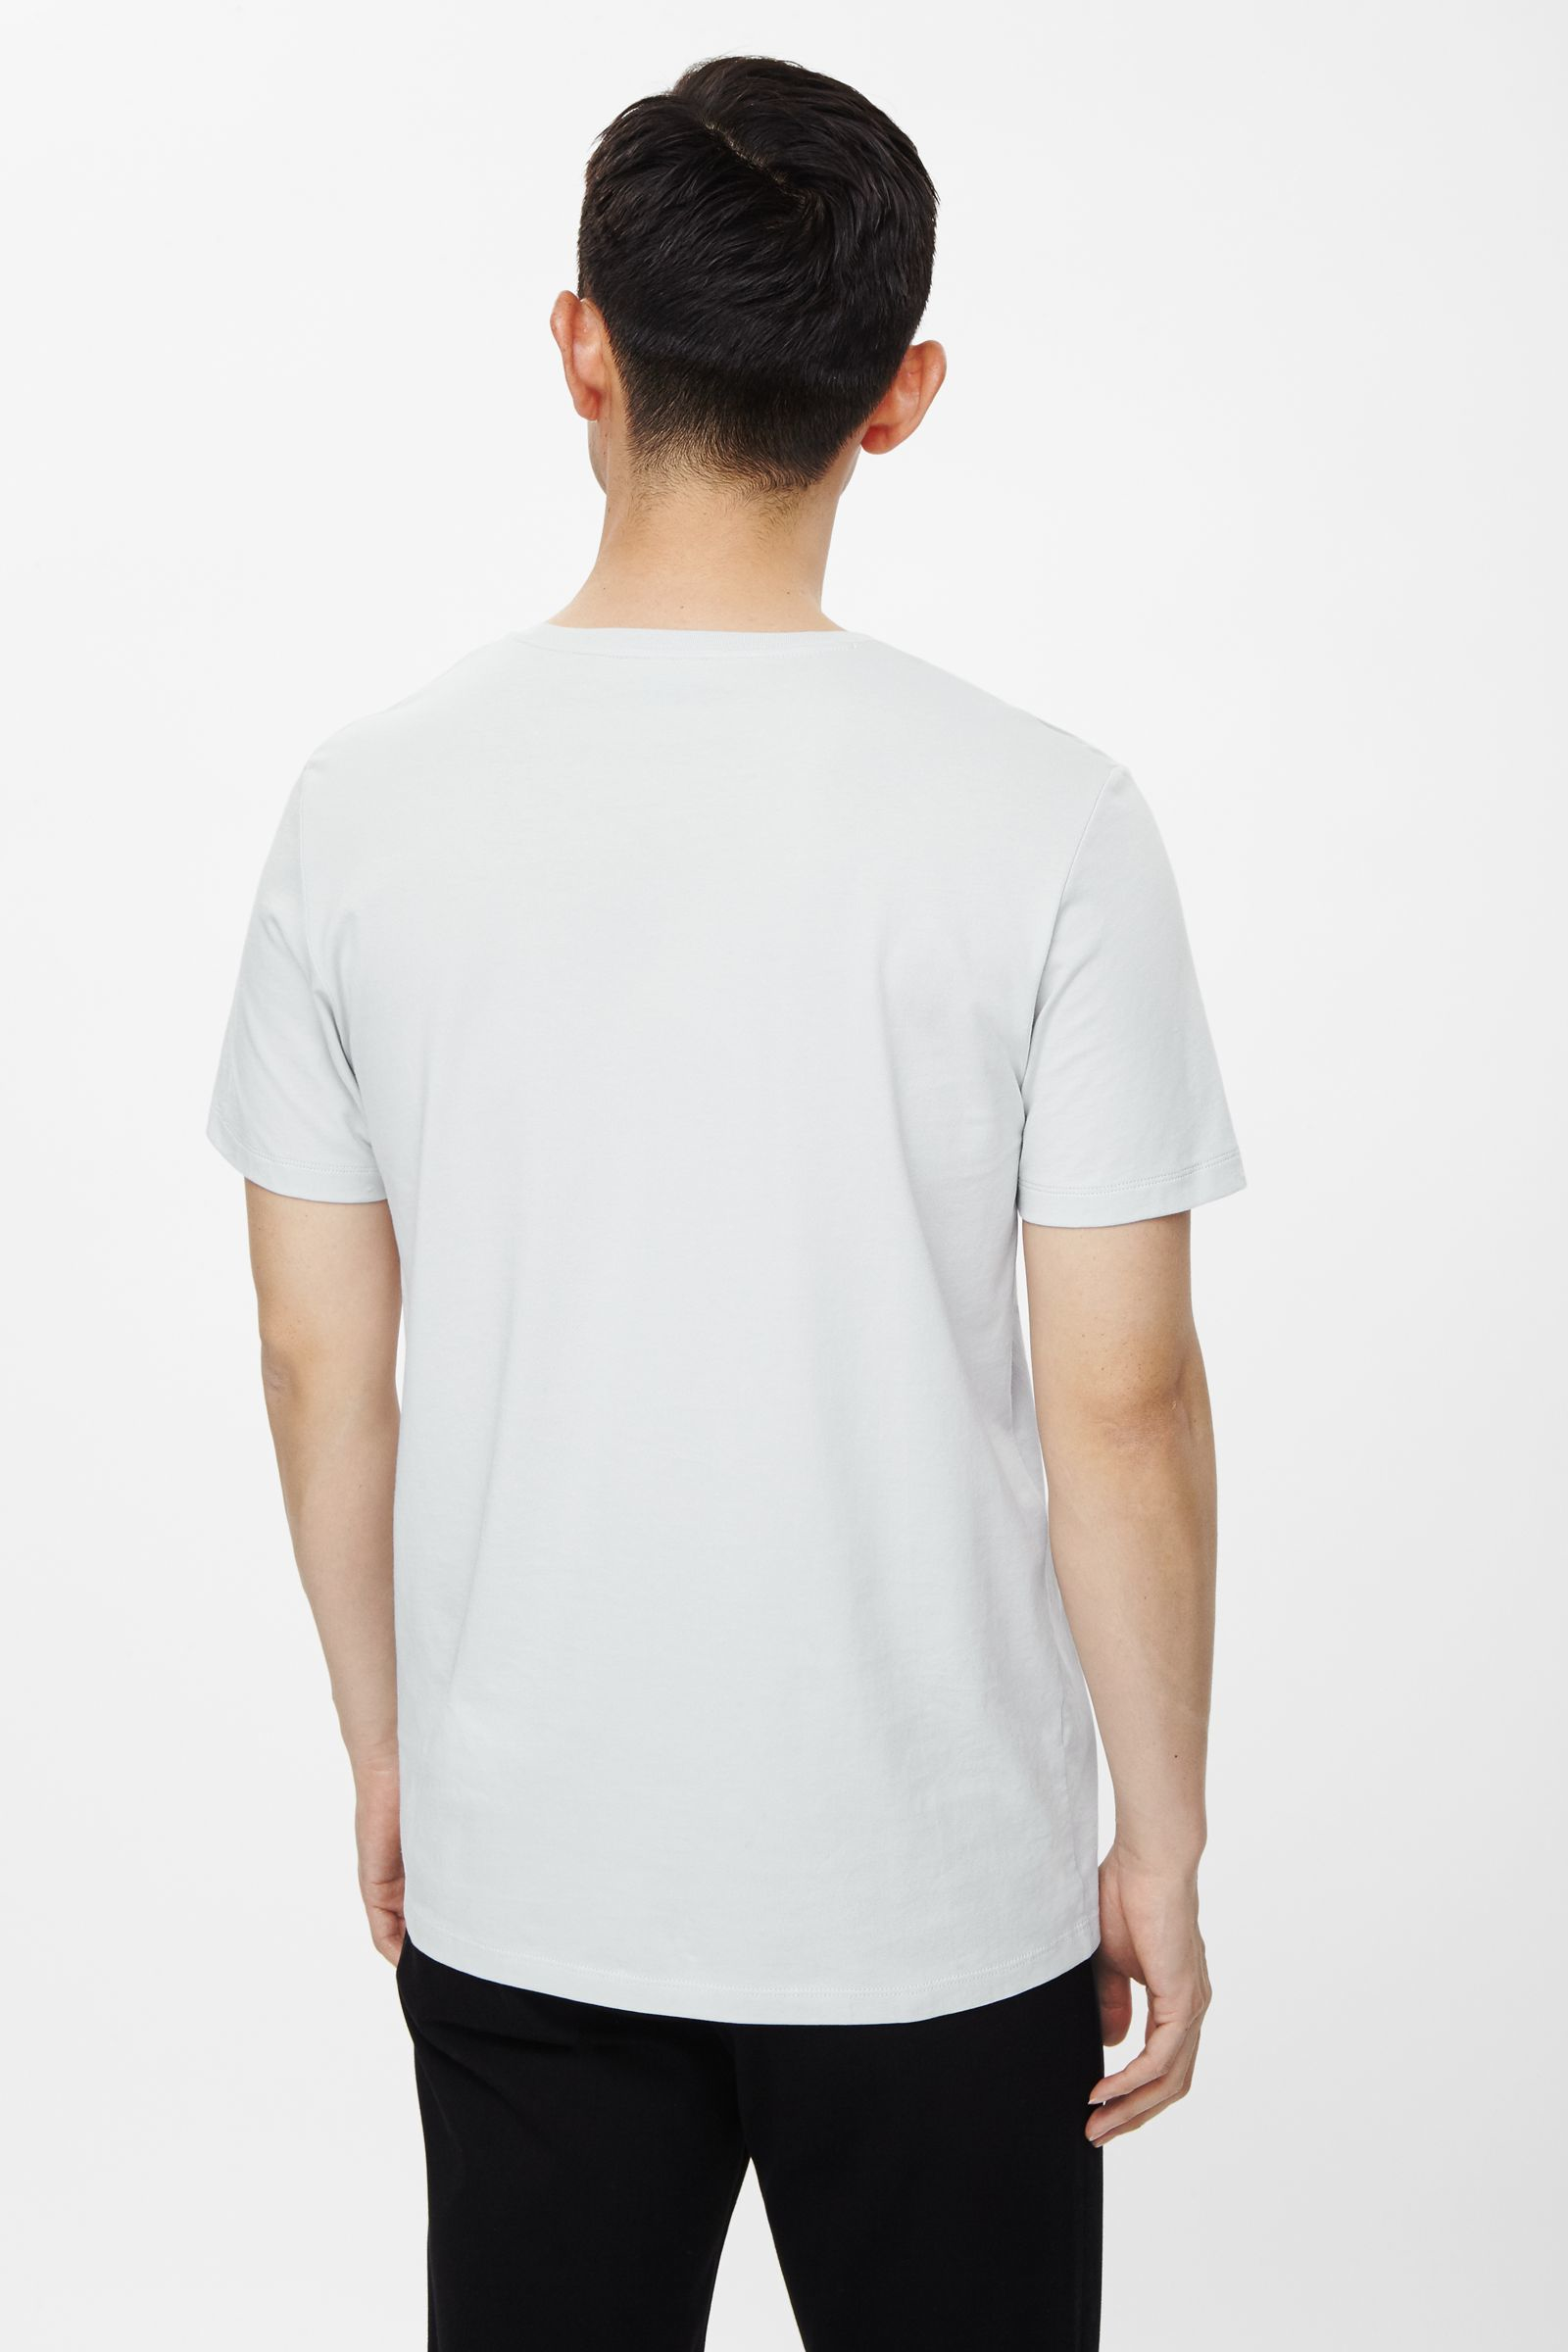 Cos Round-neck T-shirt in Gray for Men (Grey Light) | Lyst